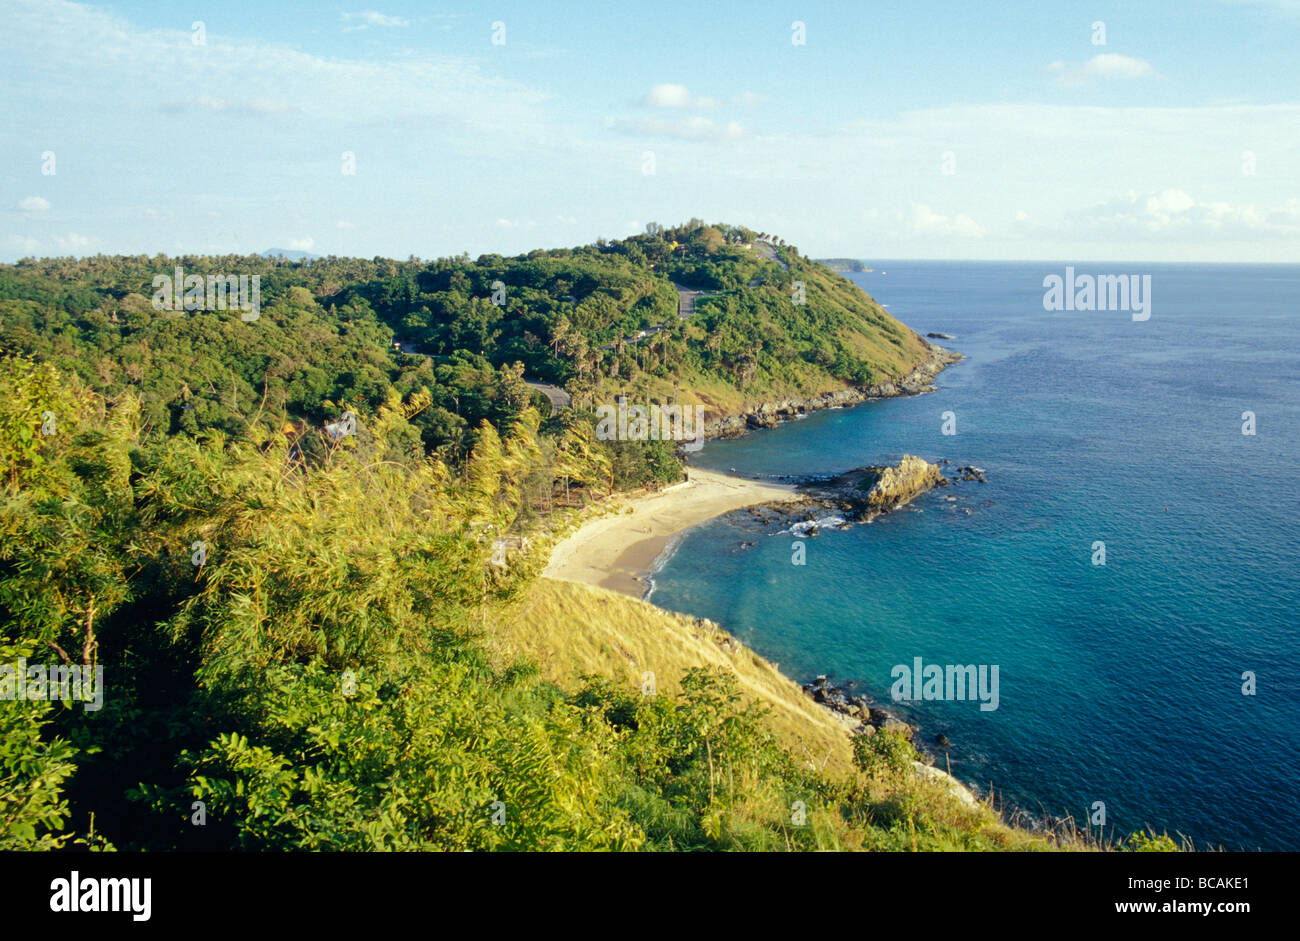 A hillside overlooking a secluded cove, beach and the blue ocean. Stock Photo